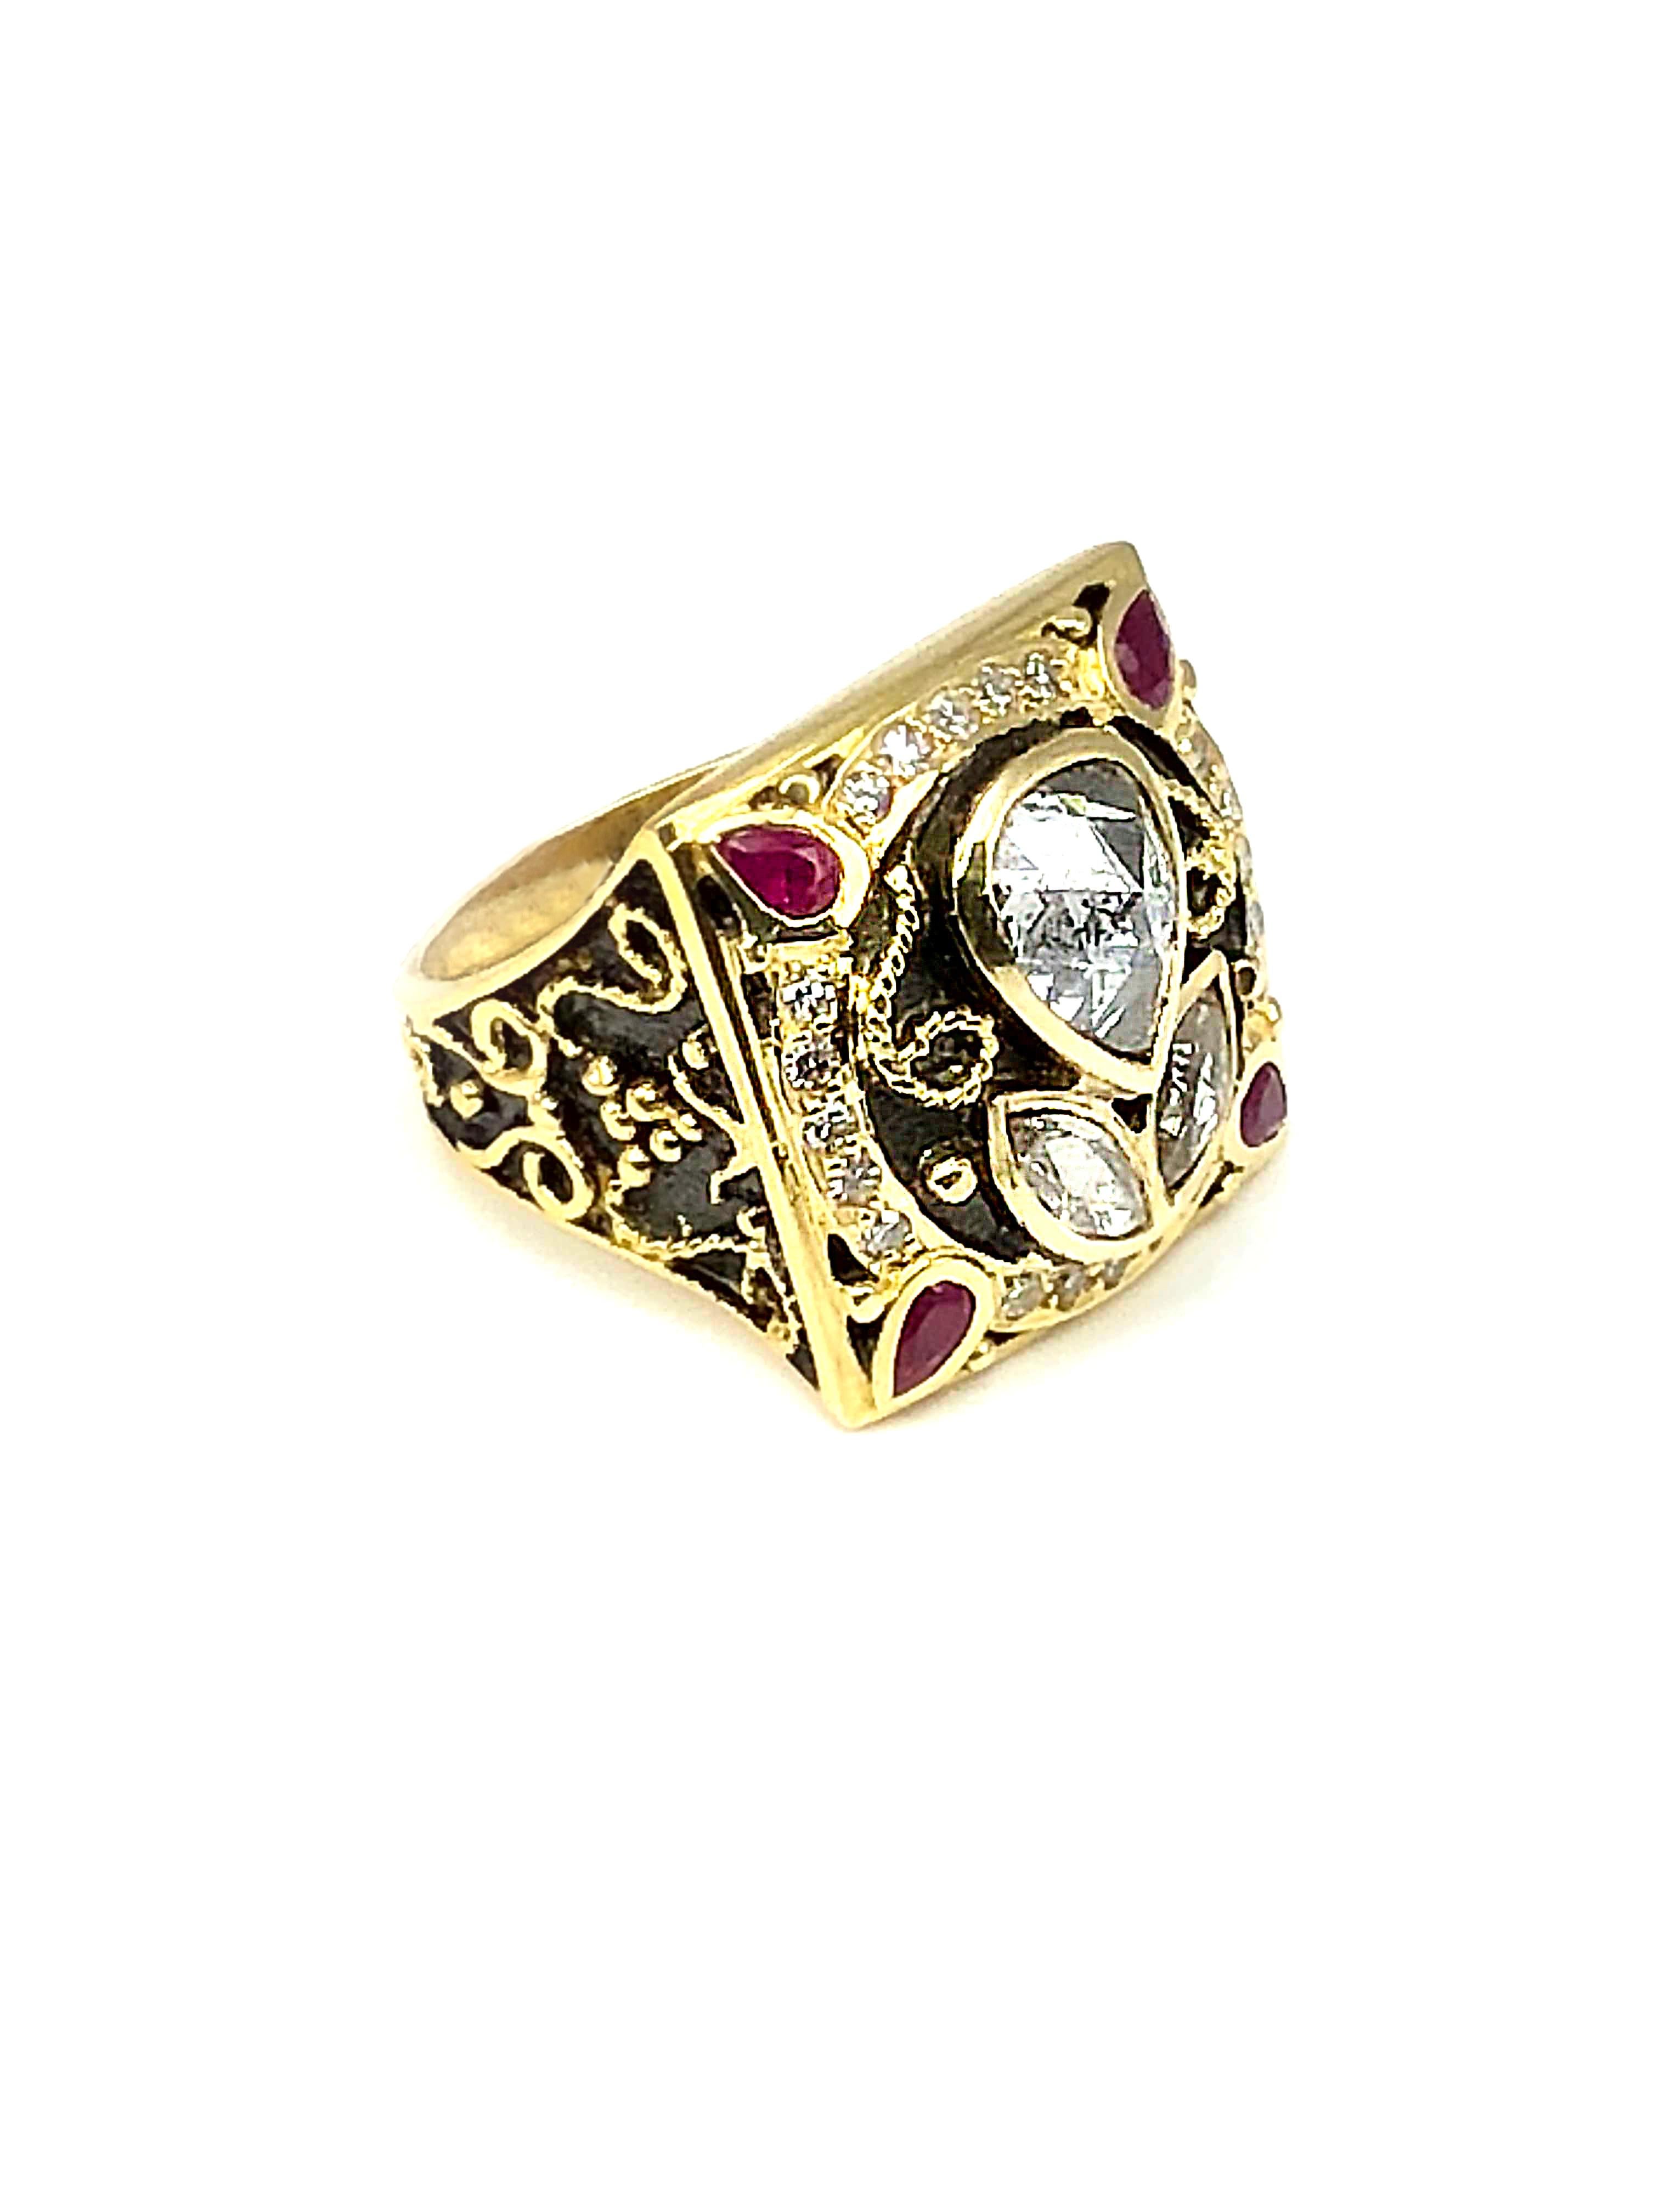 S.Georgios designer ring is handmade from solid 18 Karat Yellow Gold and all custom-made. The stunning ring is decorated with gold wires and beads. Granulated details contrast with Byzantine velvet background finished with Black Rhodium. This